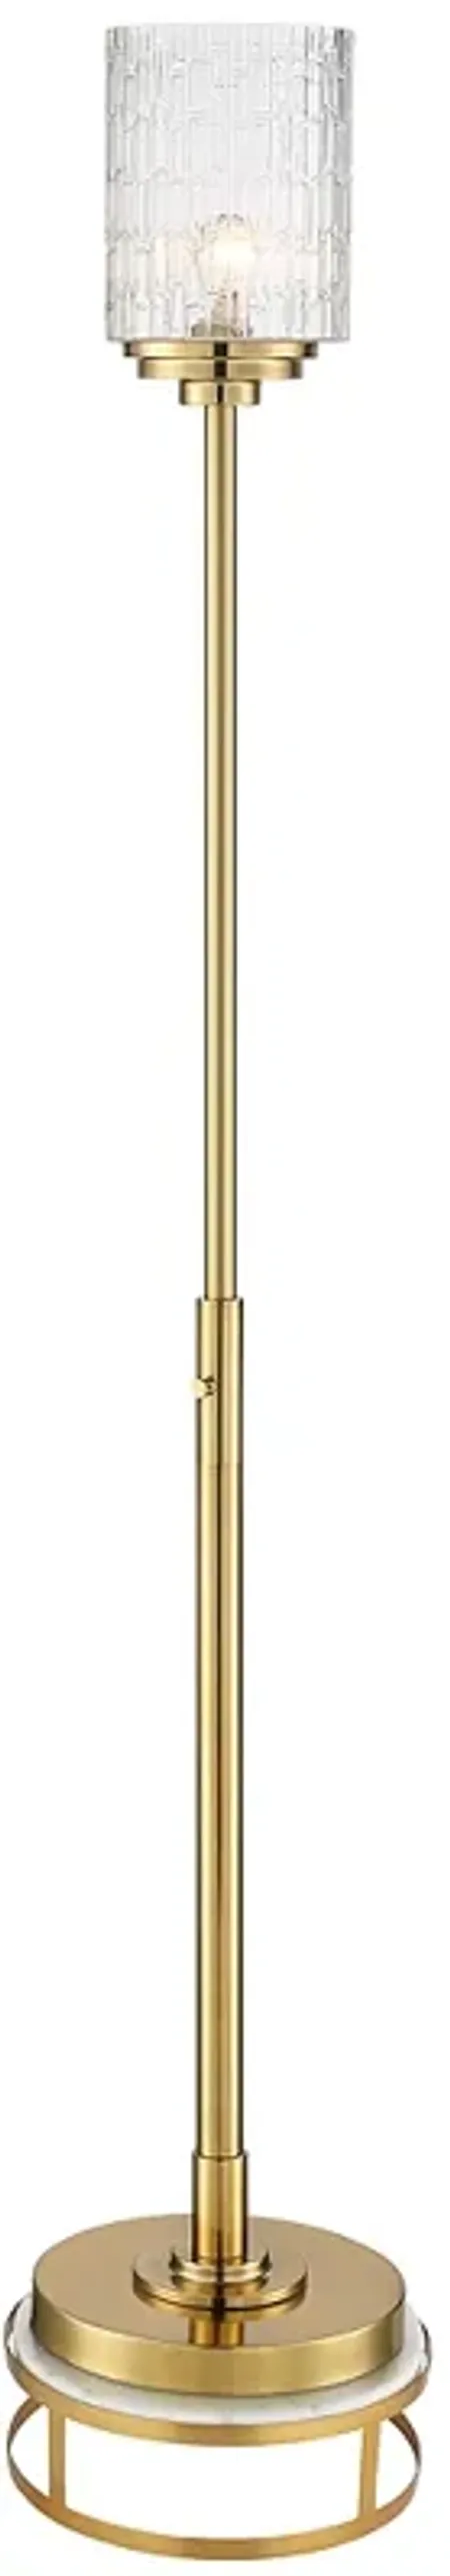 Possini Euro Kinsey 78" Modern Brass Torchiere Floor Lamp with Riser